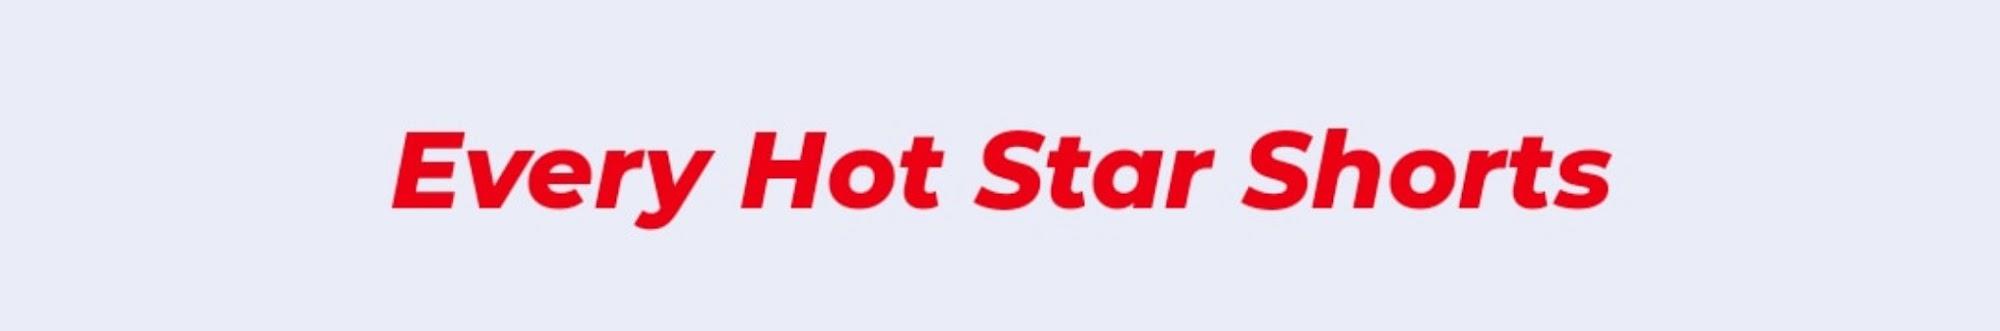 EVERY HOT STAR SHORTS